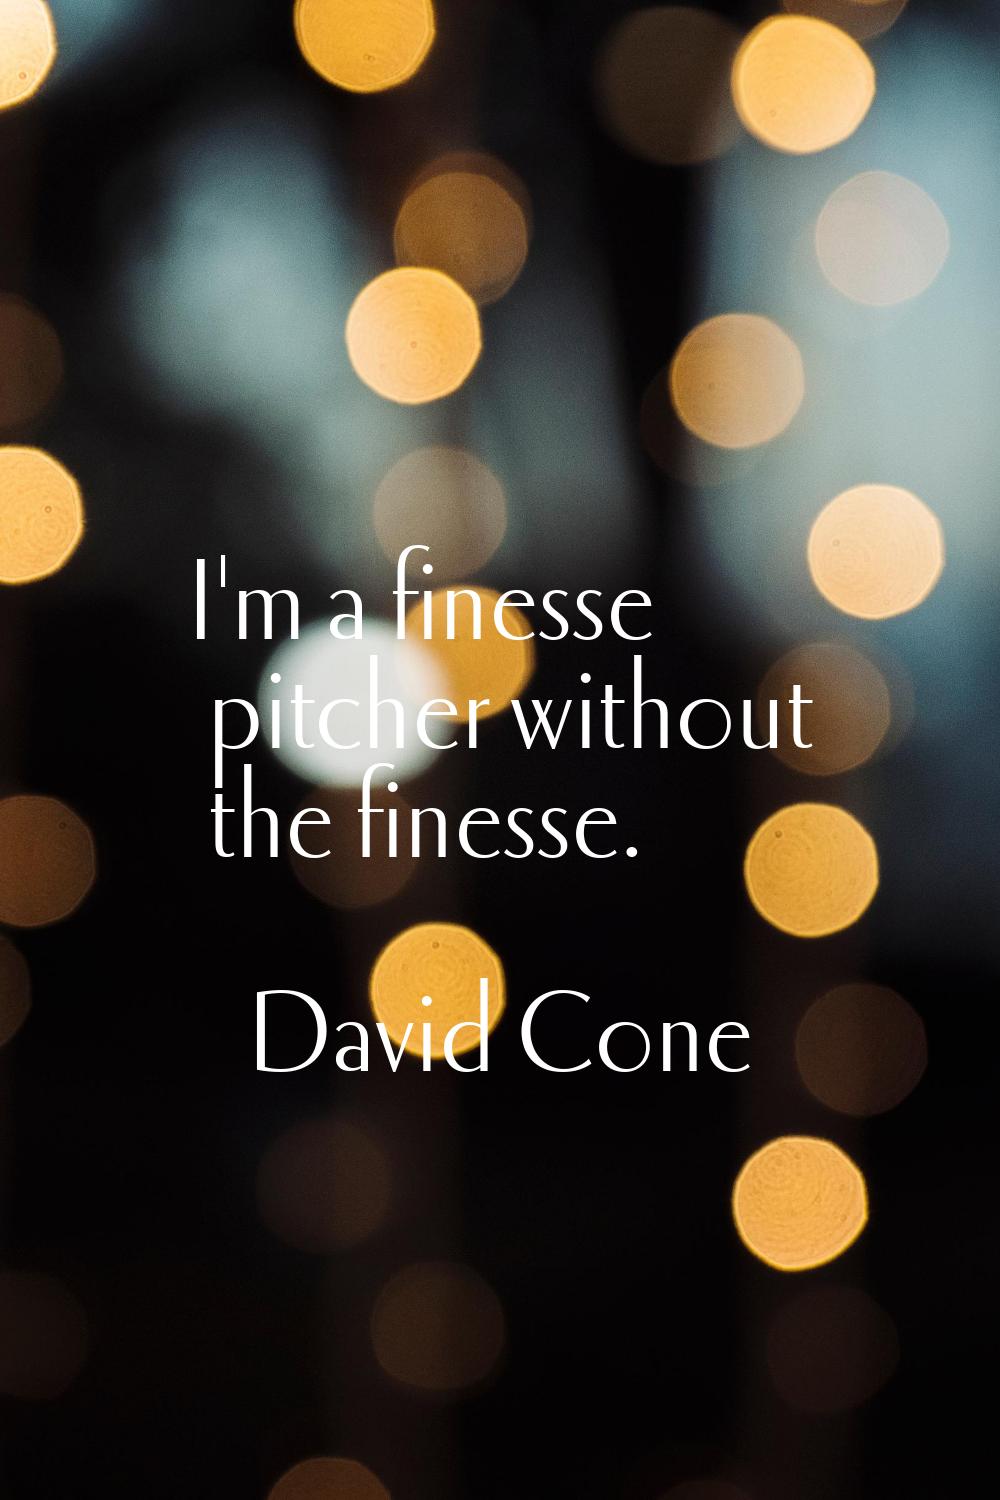 I'm a finesse pitcher without the finesse.